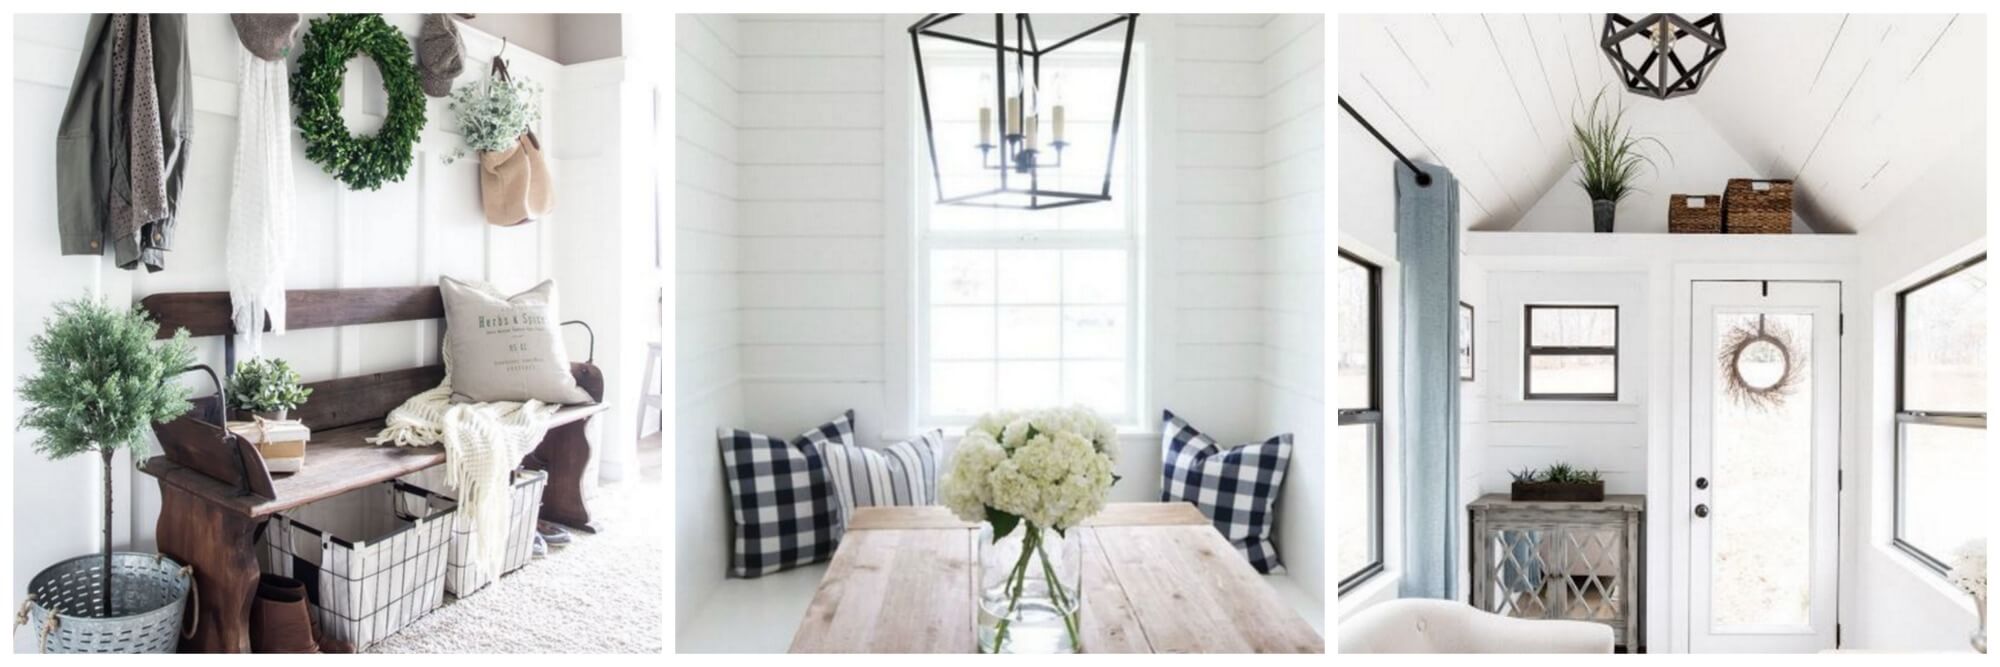 Three examples of a modern or classic farmhouse style